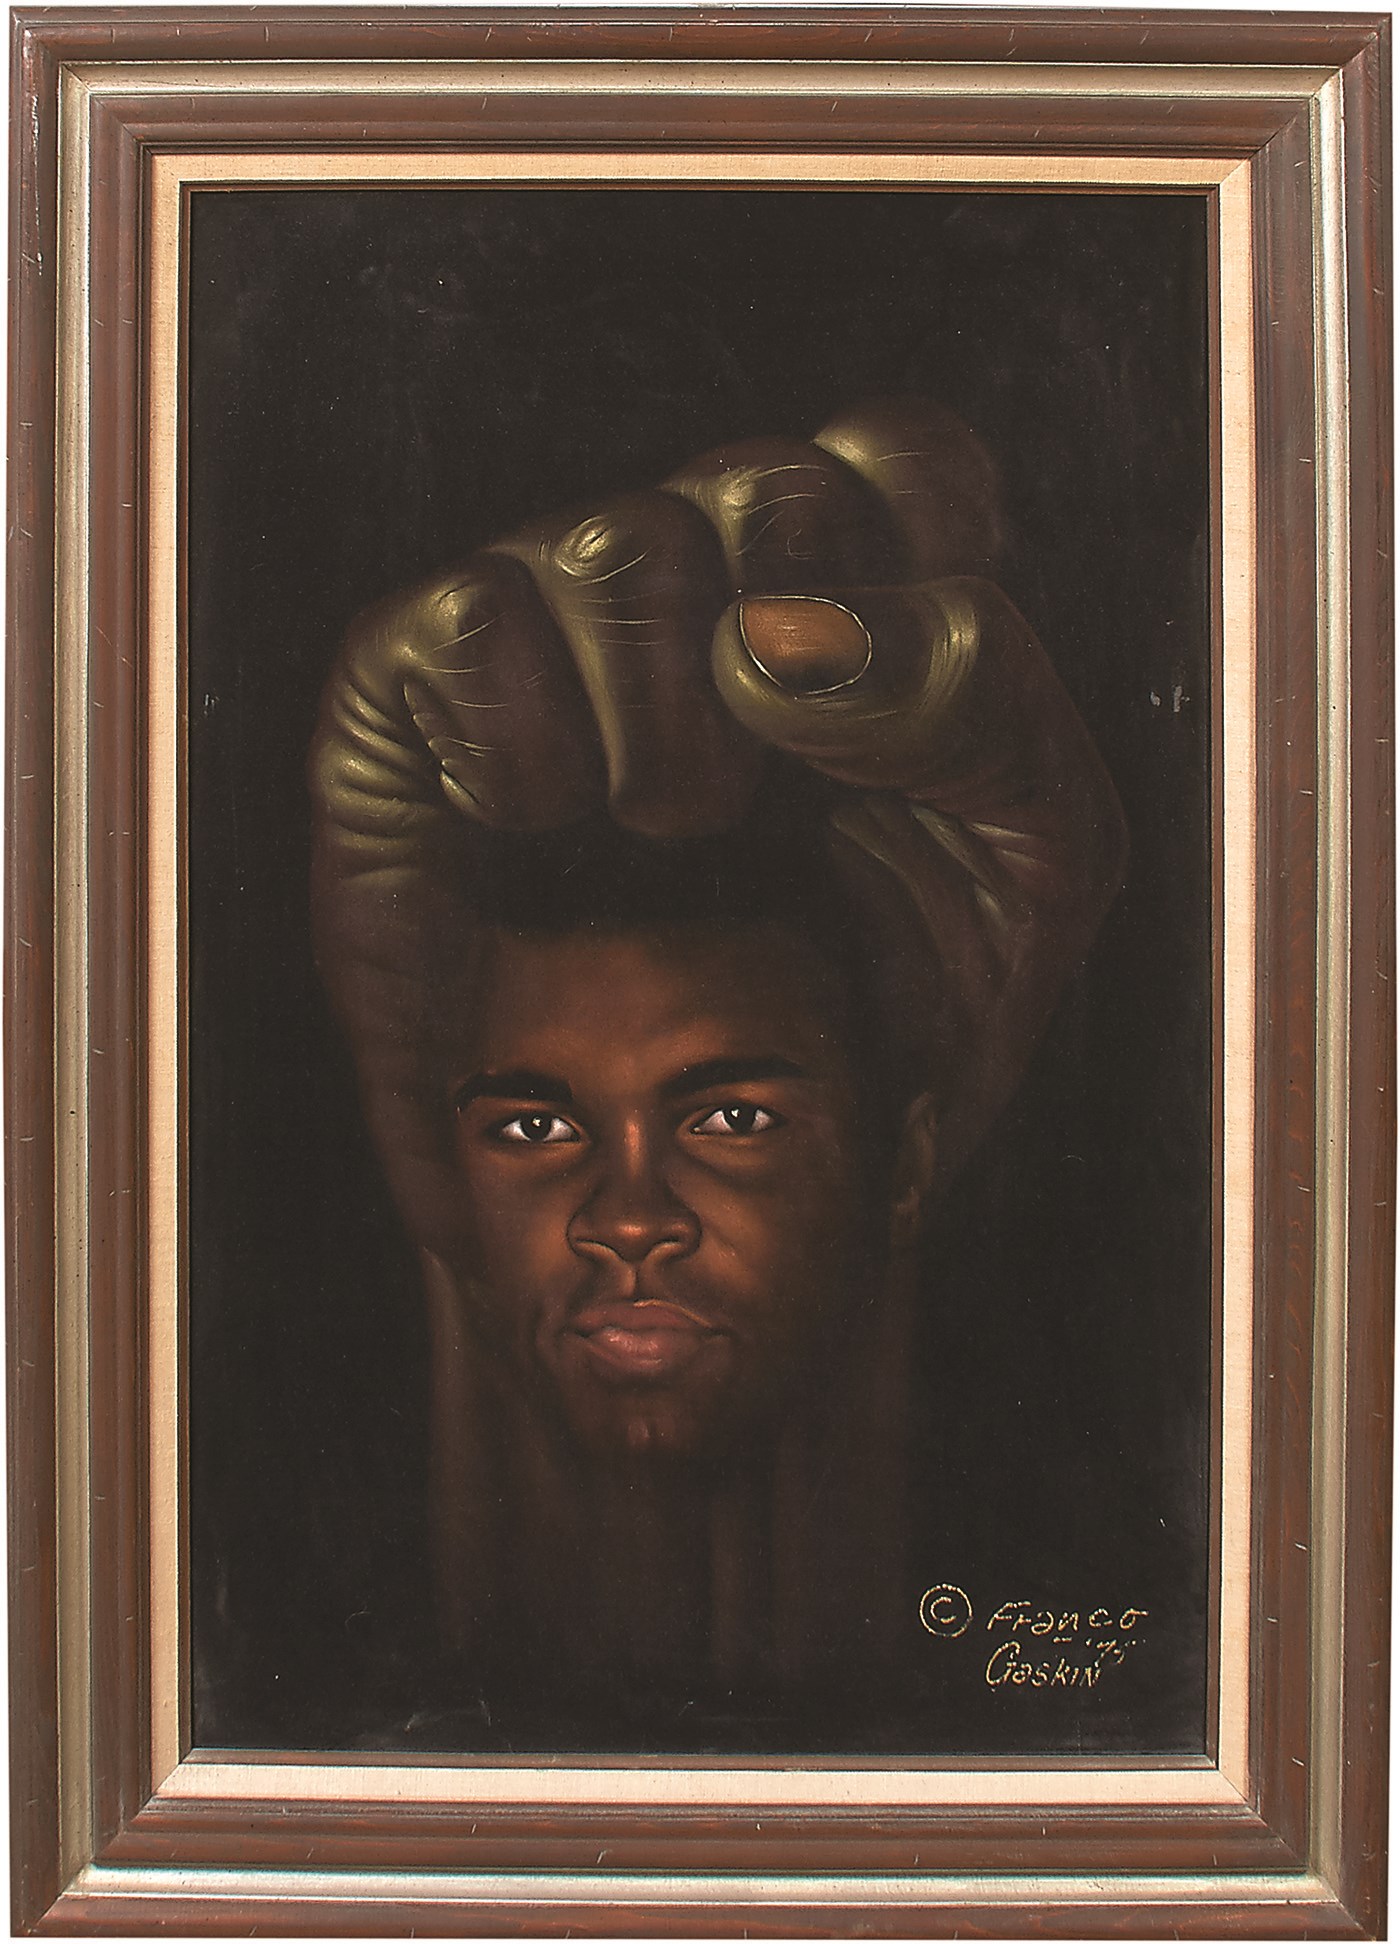 - Exceptional Muhammad Ali "Power of the People" Oil on Black Velvet Painting - Presented to Ali by the Artist